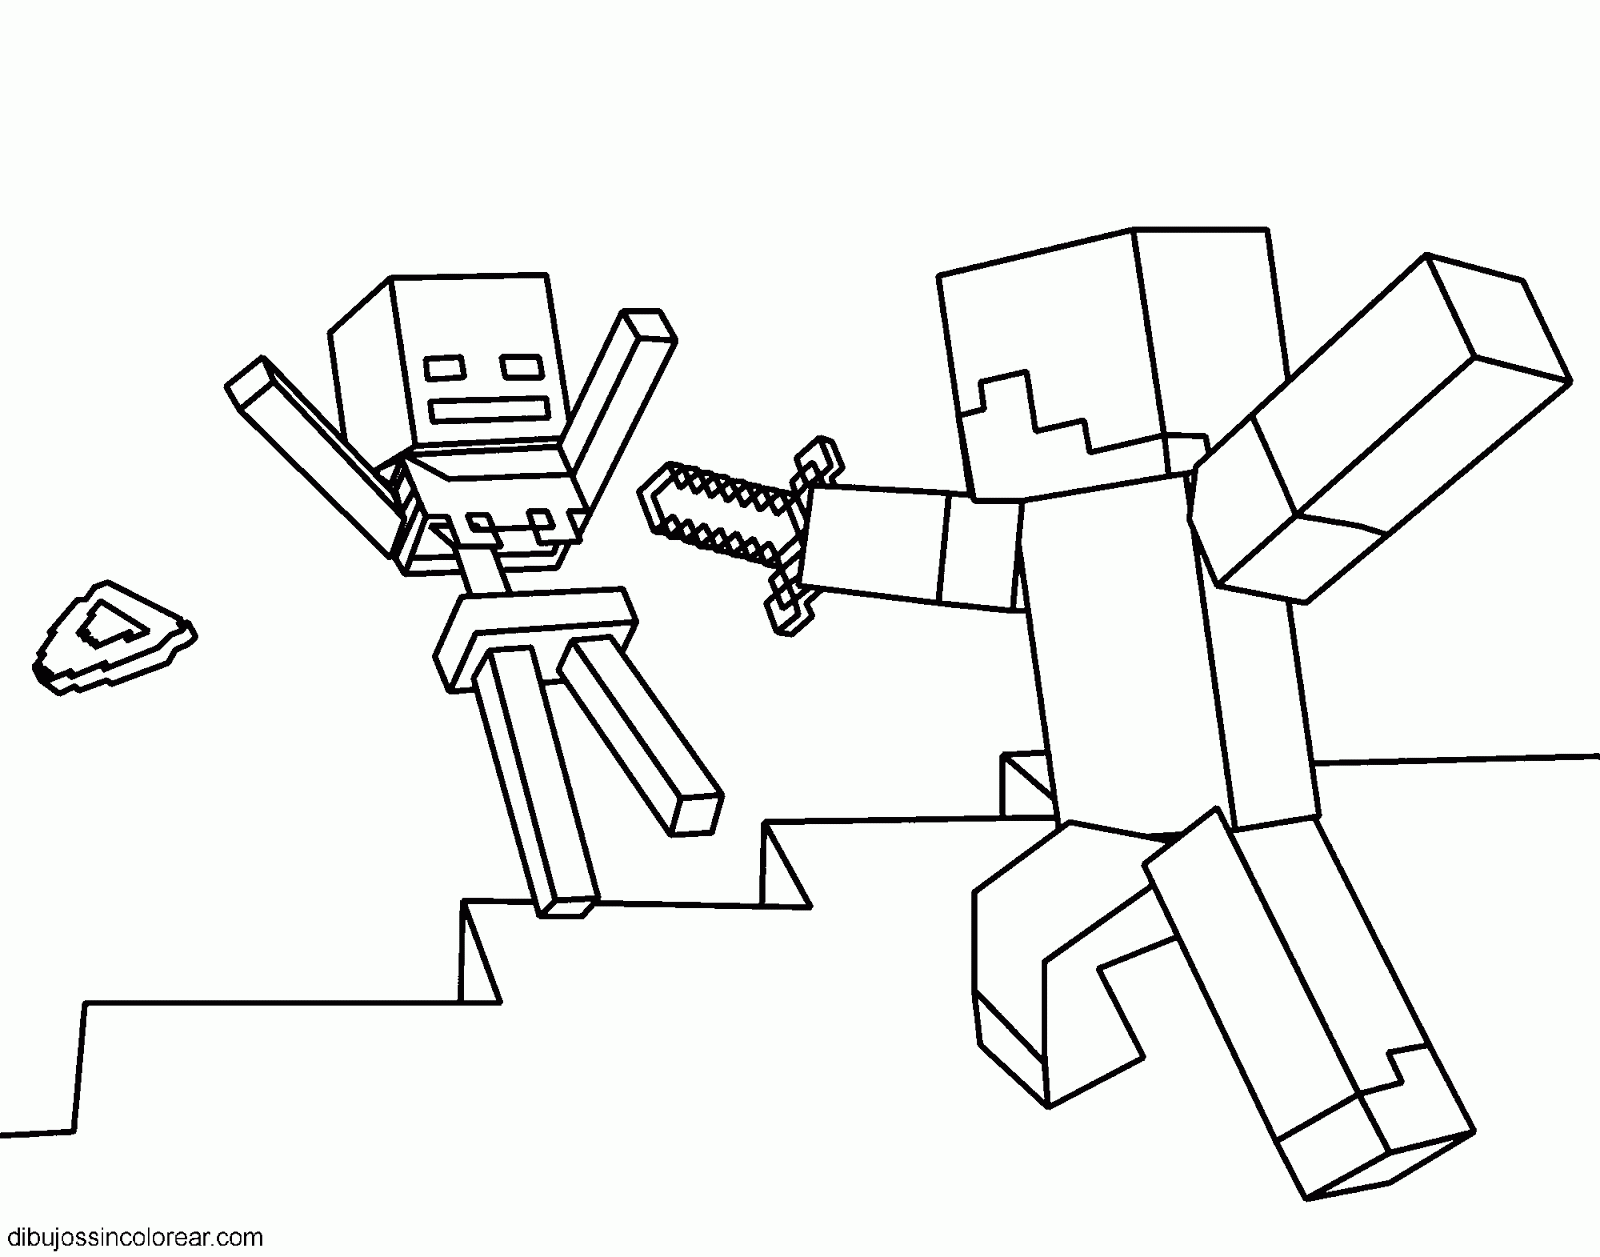 Free coloring pages of minecraft whither